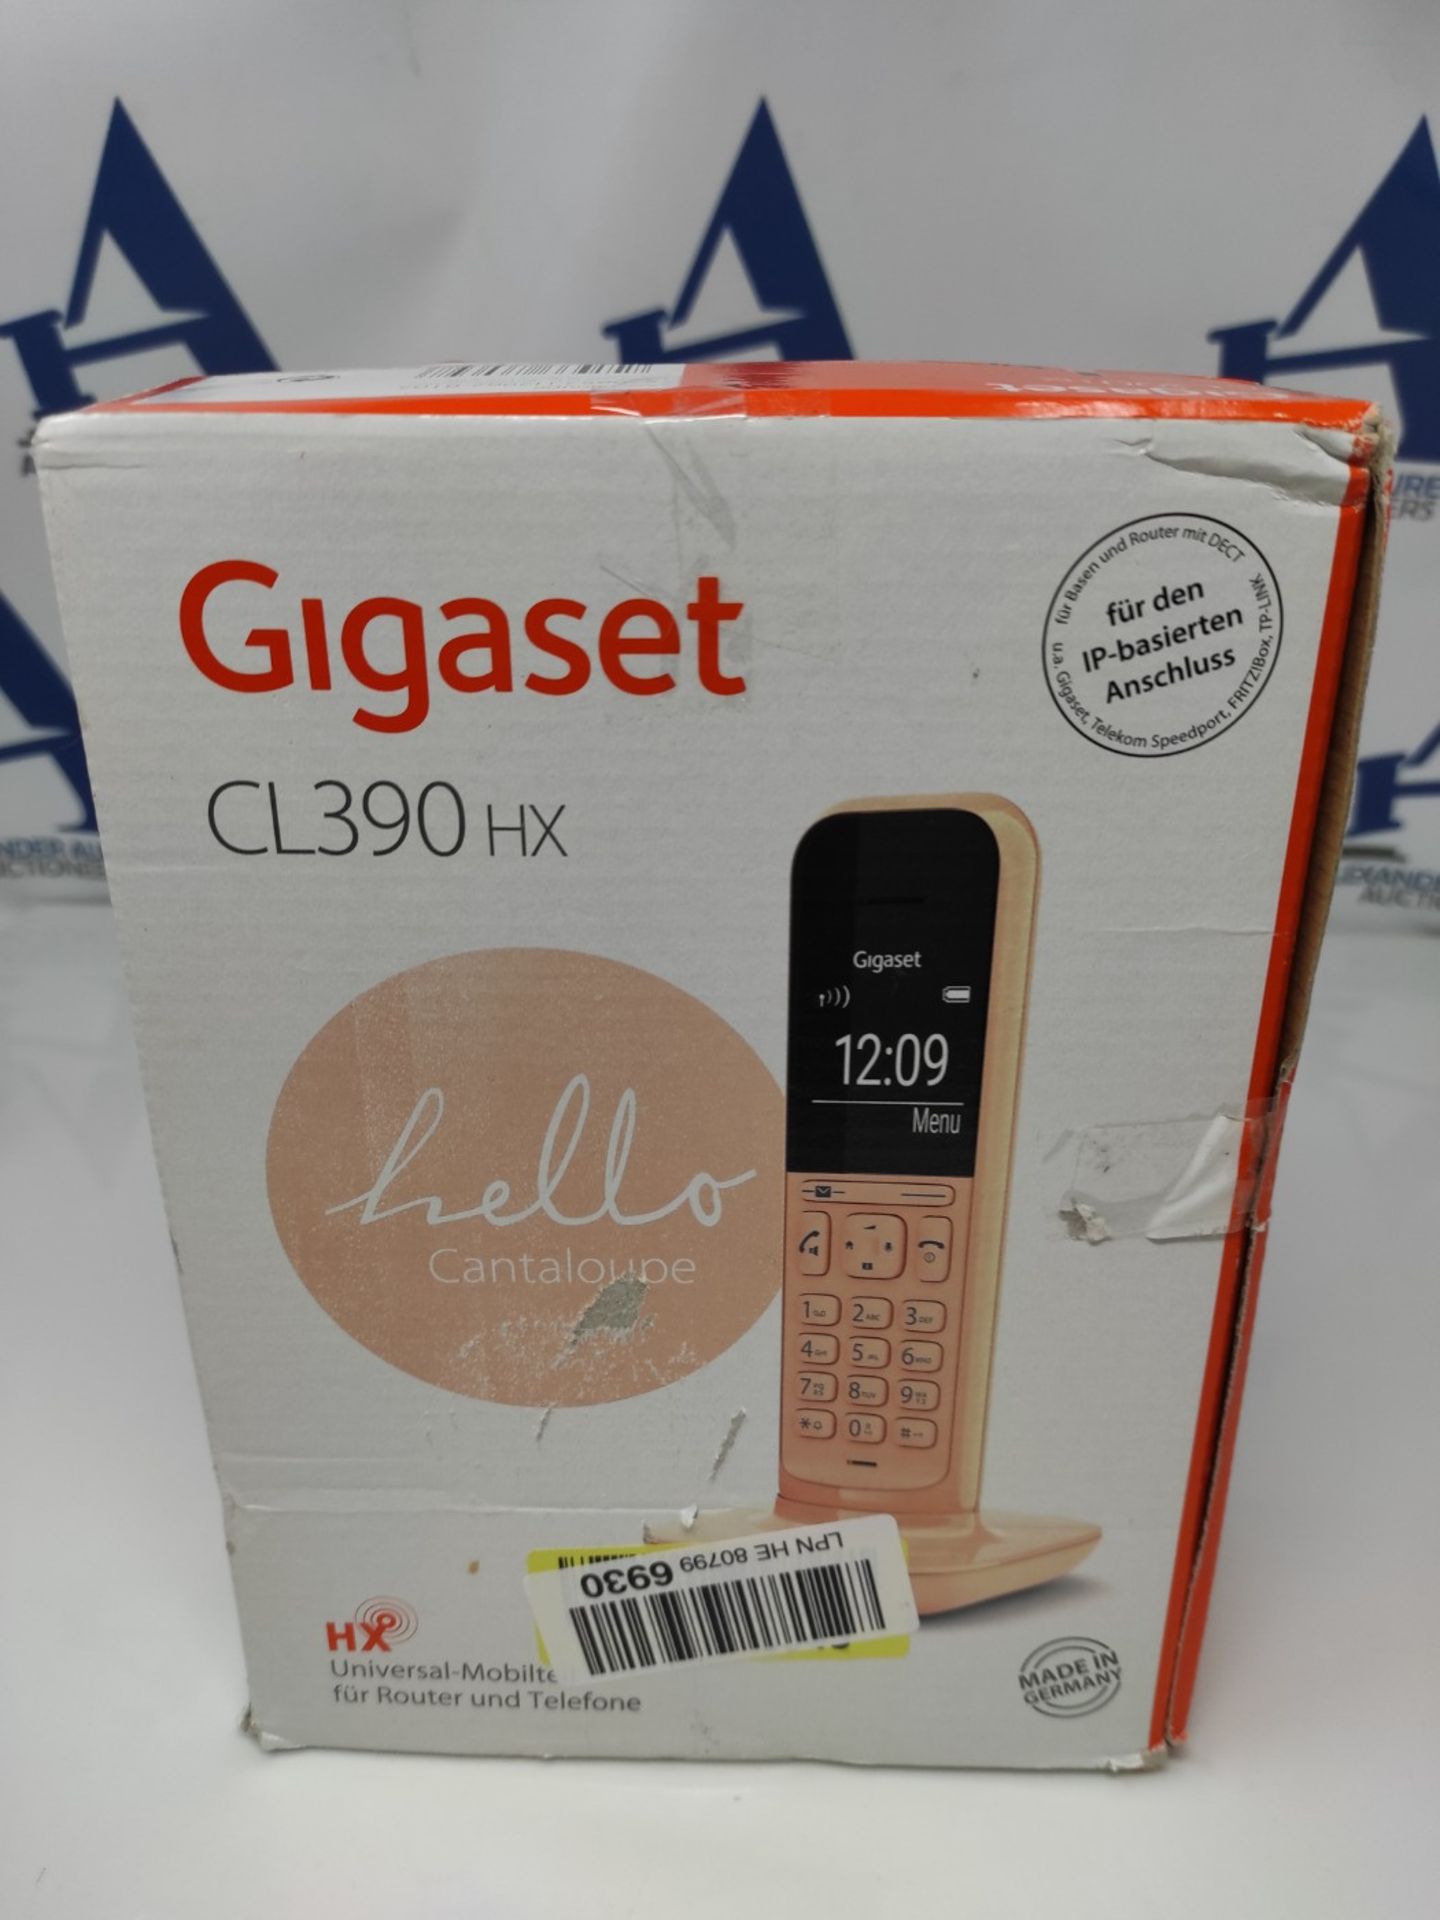 Gigaset CL390HX - Design DECT handset with charging cradle - Cordless phone for router - Image 2 of 6